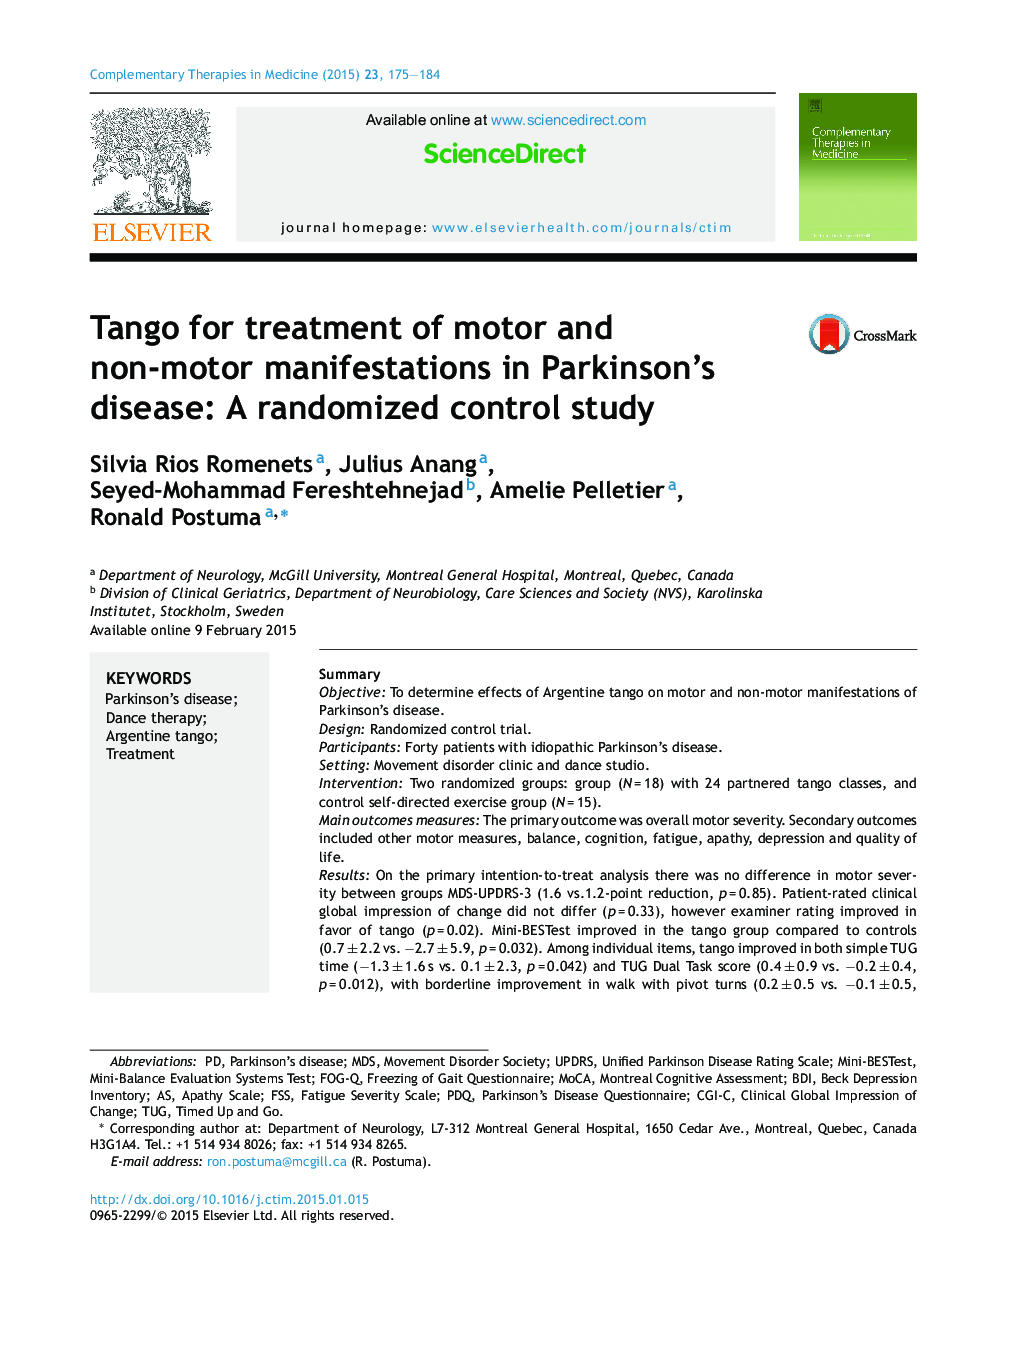 Tango for treatment of motor and non-motor manifestations in Parkinson's disease: A randomized control study